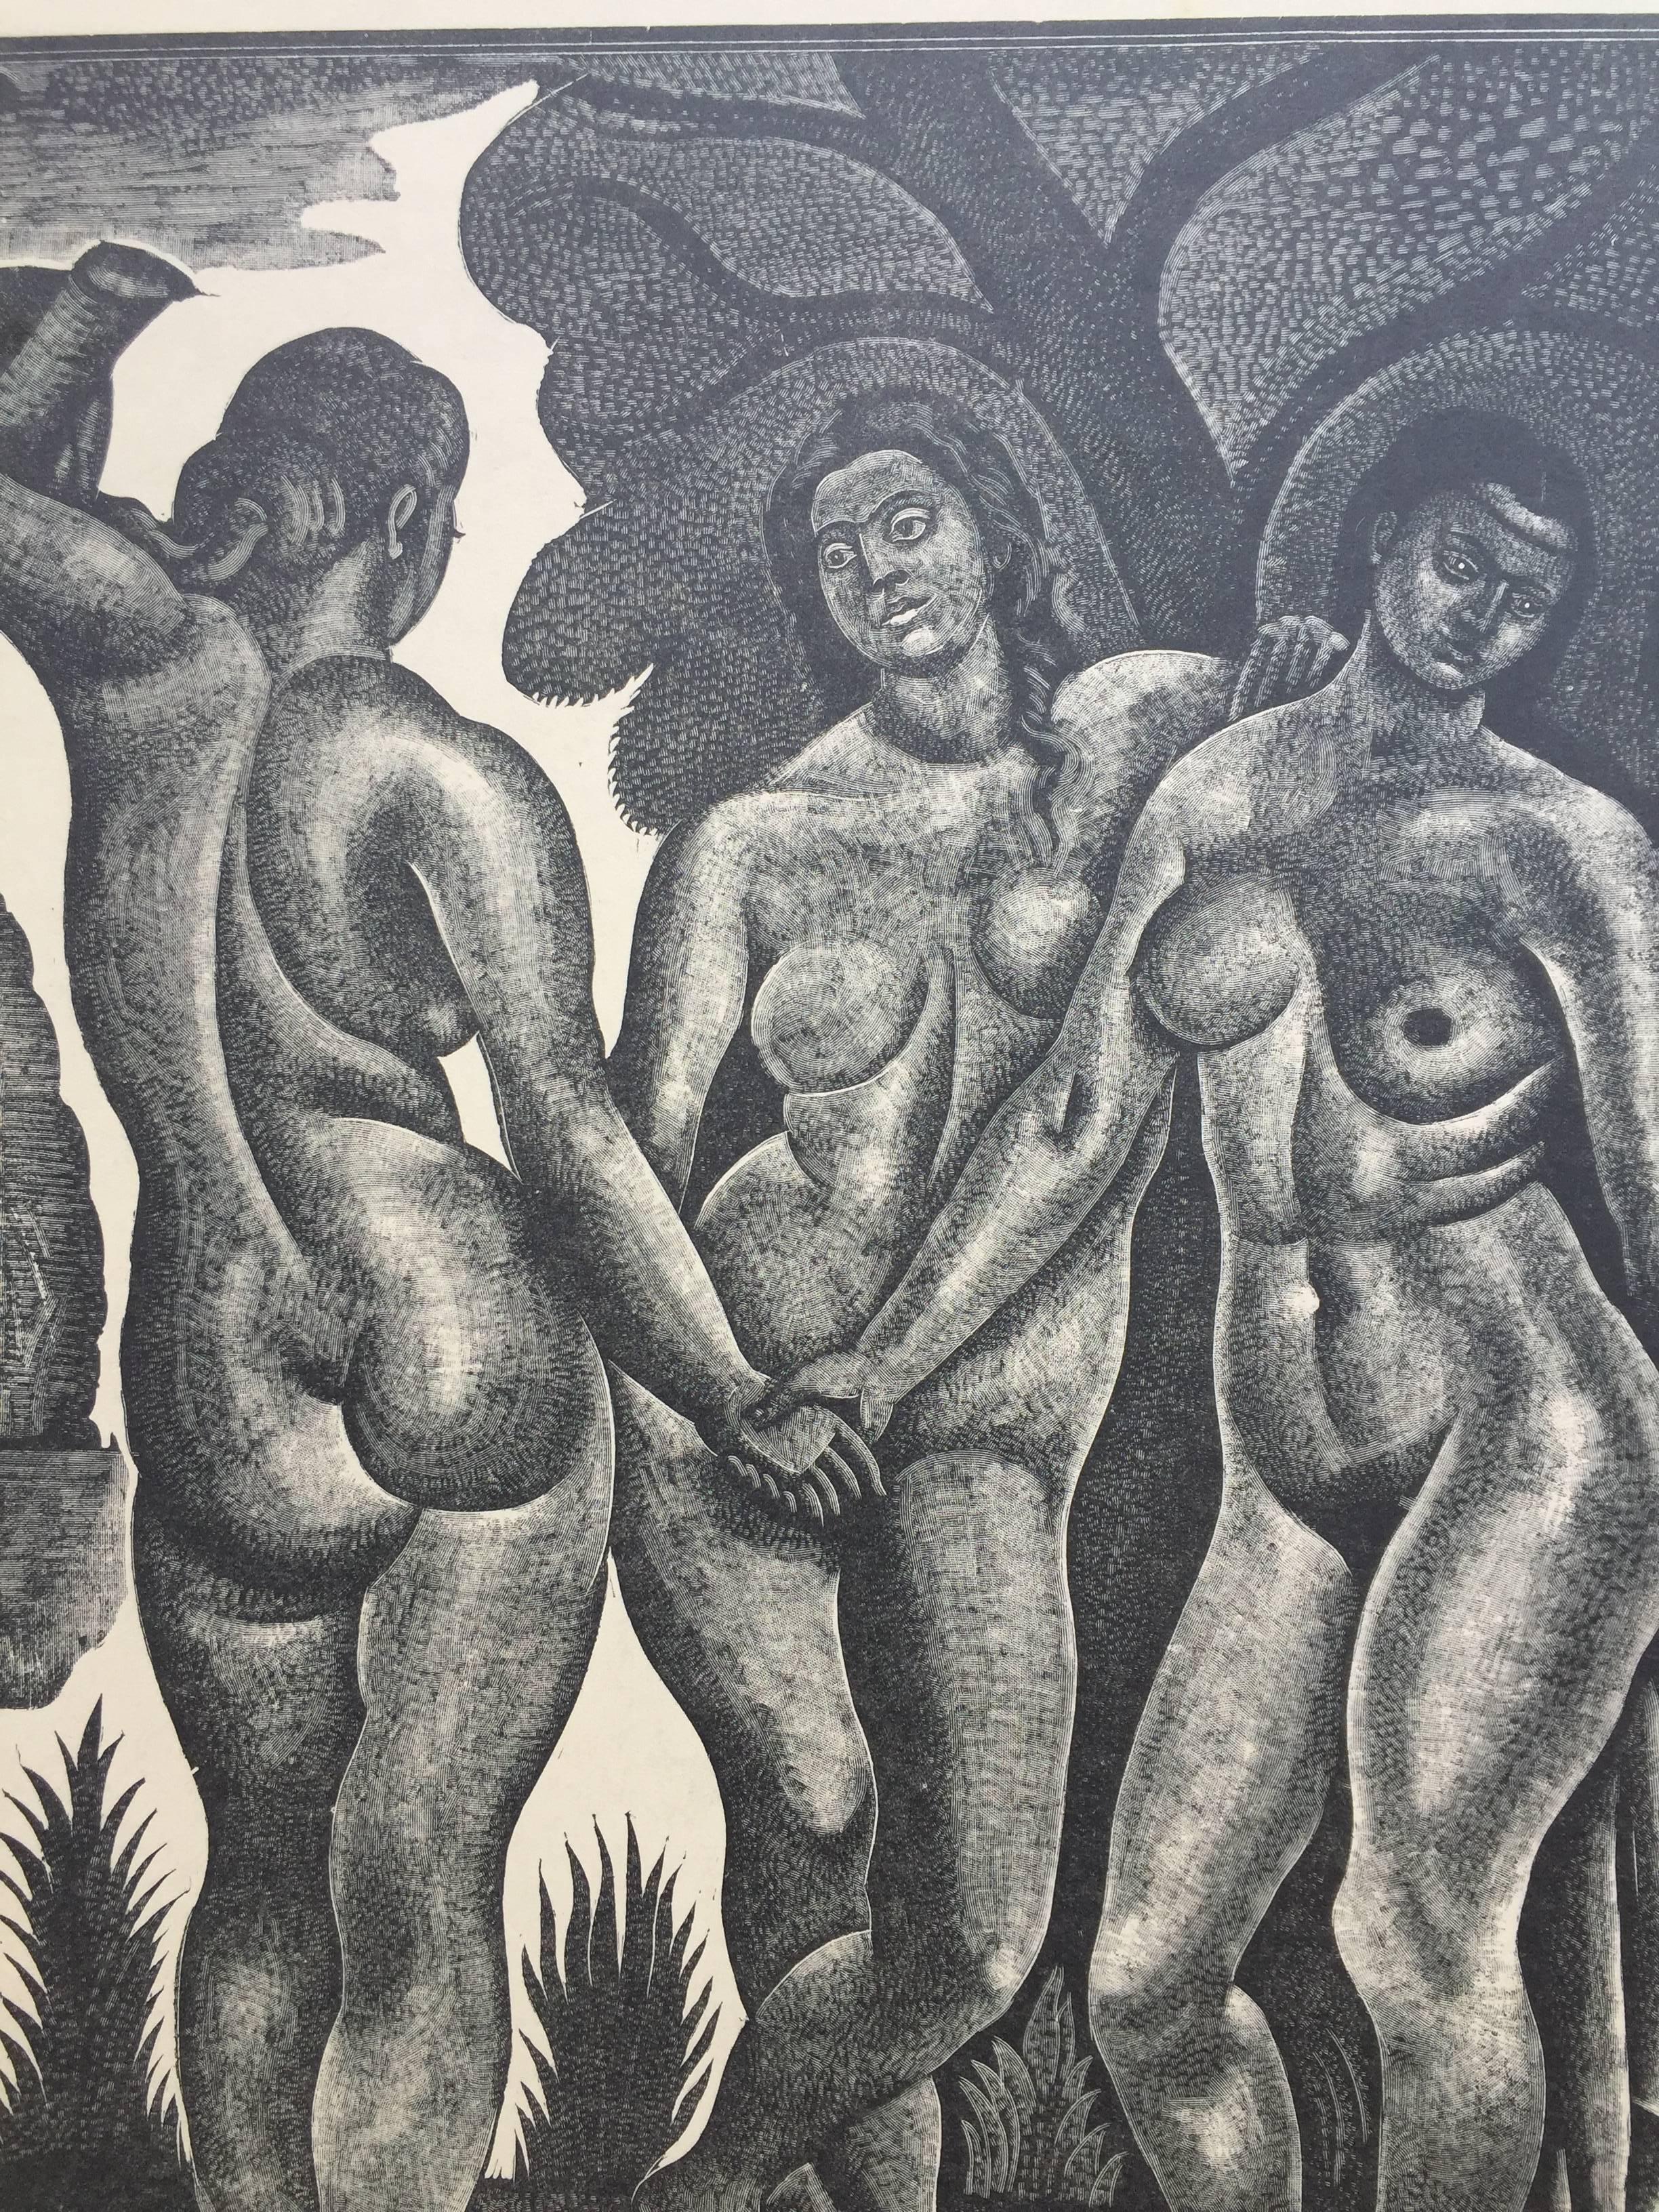 DEMETRIOS GALINIS (Greece 1882 - 1988)

          THREE GRACES ca. 1920-30
          Wood engraving, signed and numbered in pencil. Edition 8, 17 3/4 x14 
          inches. Sheet 22 1/2 x 17 1/4 Inches. Very handsome  and powerful work.             